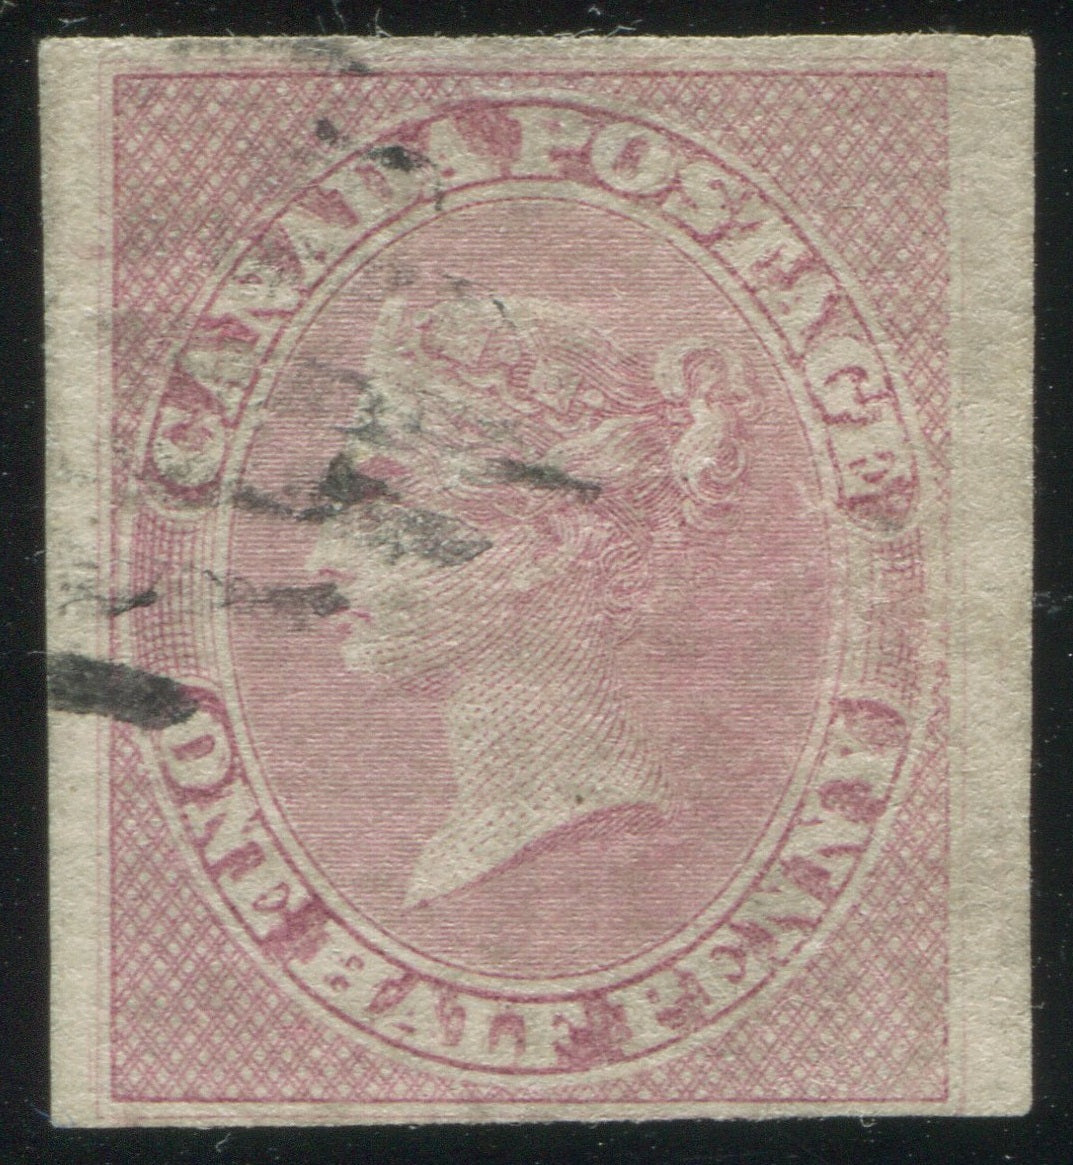 0008CA1905 - Canada #8aii - Used Horizontally Ribbed Paper &amp; Major Re-Entry